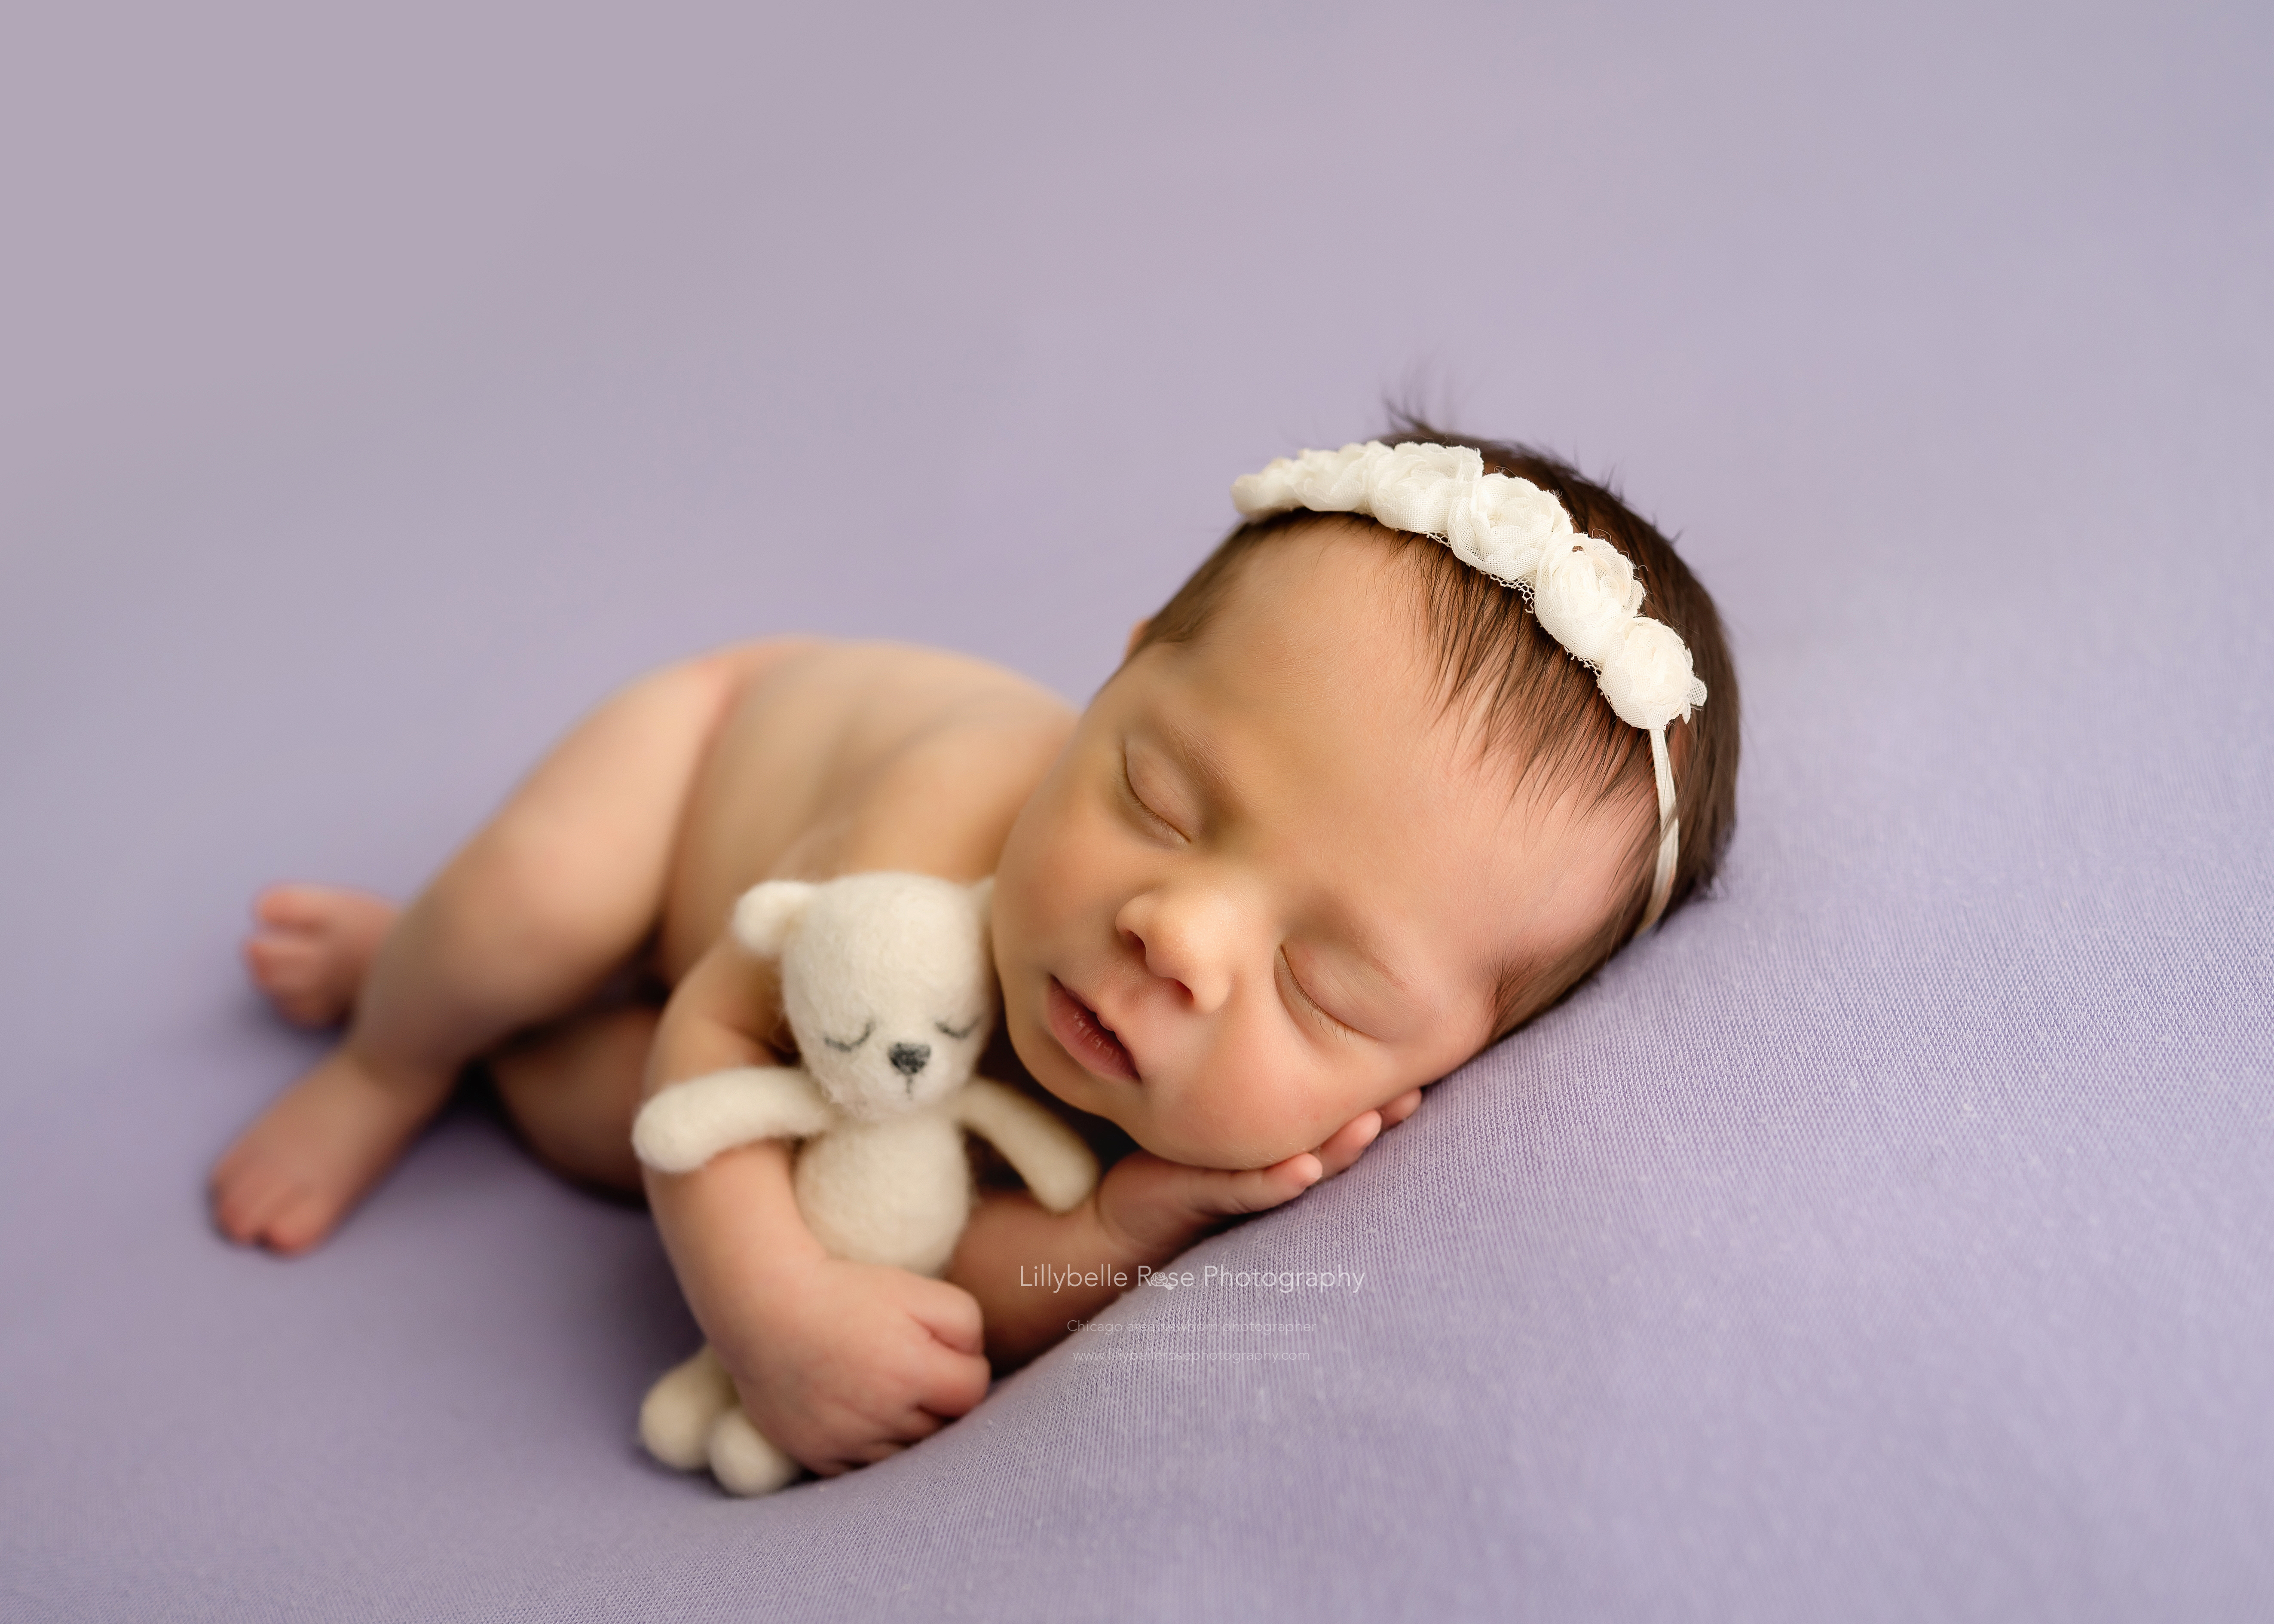 caring for your newborn baby's skin, chicago newborn photography, elmhurst newborn photography